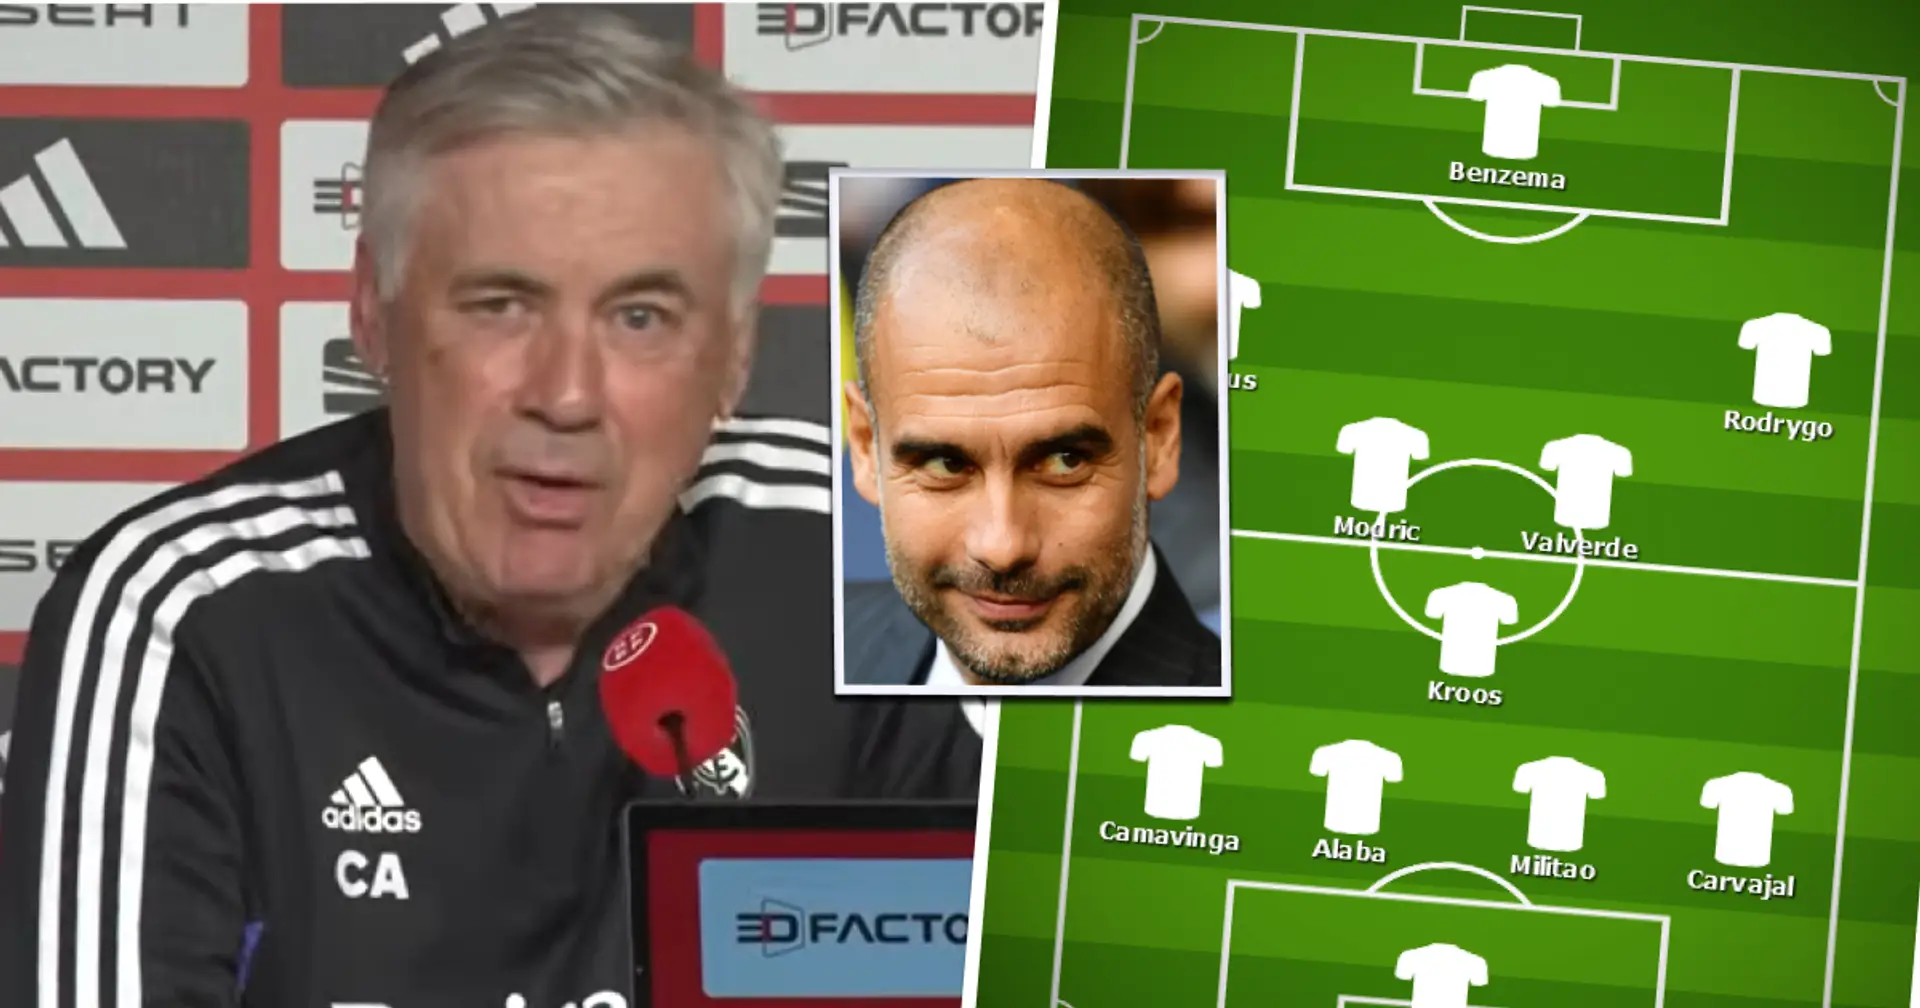 Carlo Ancelotti reveals what his starting XI for Man City could look like